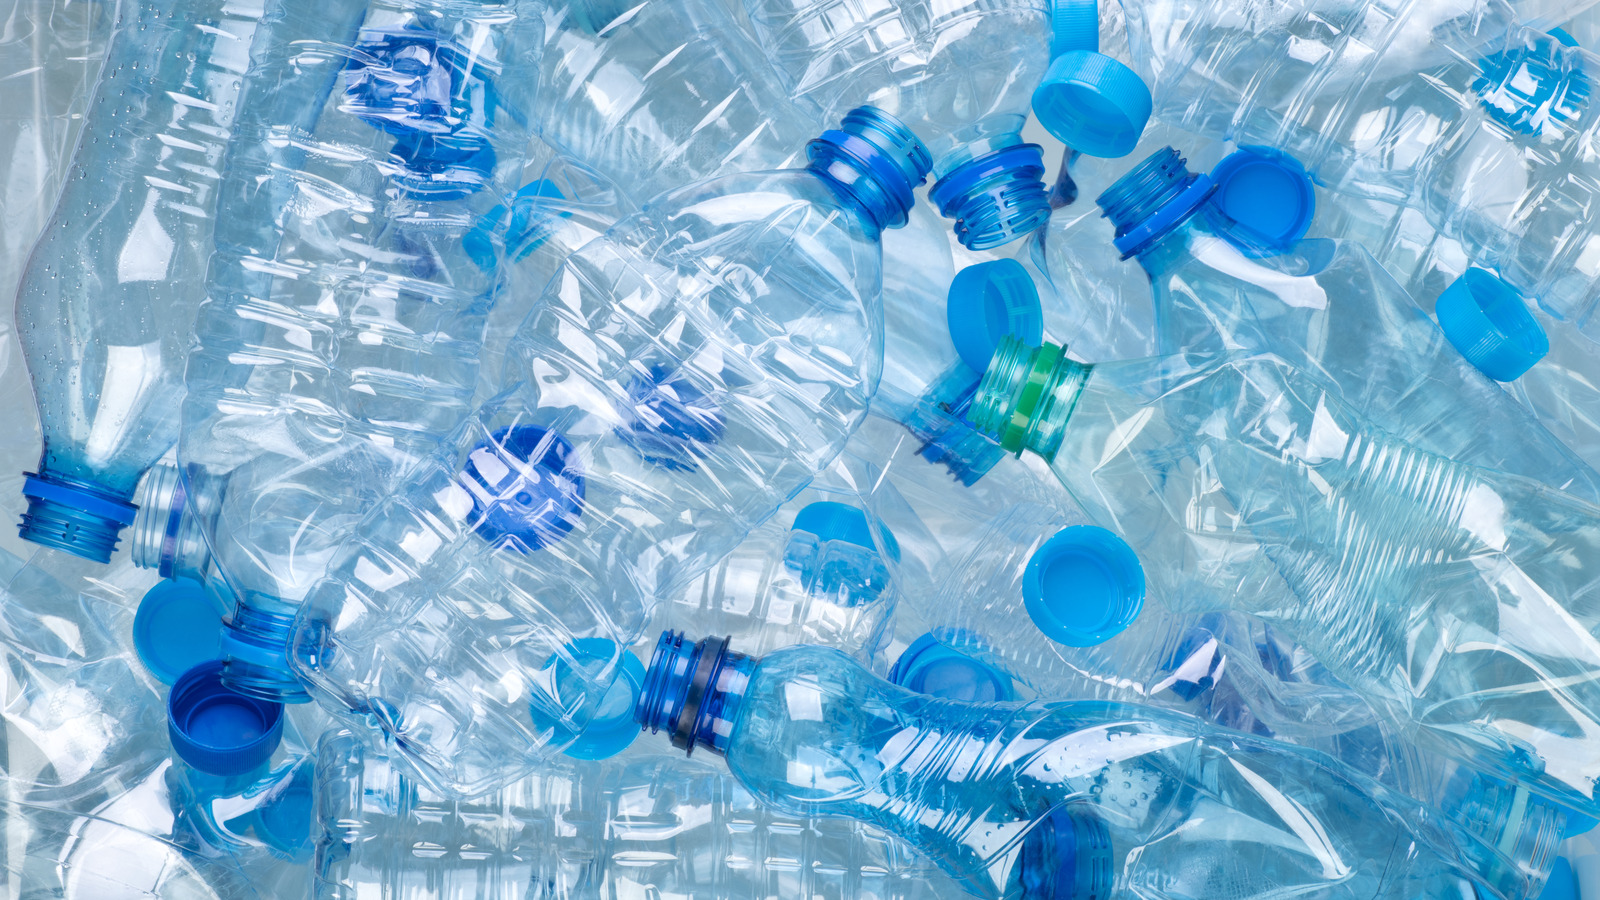 Why It's A Bad Idea To Reuse Plastic Single-Use Water Bottles